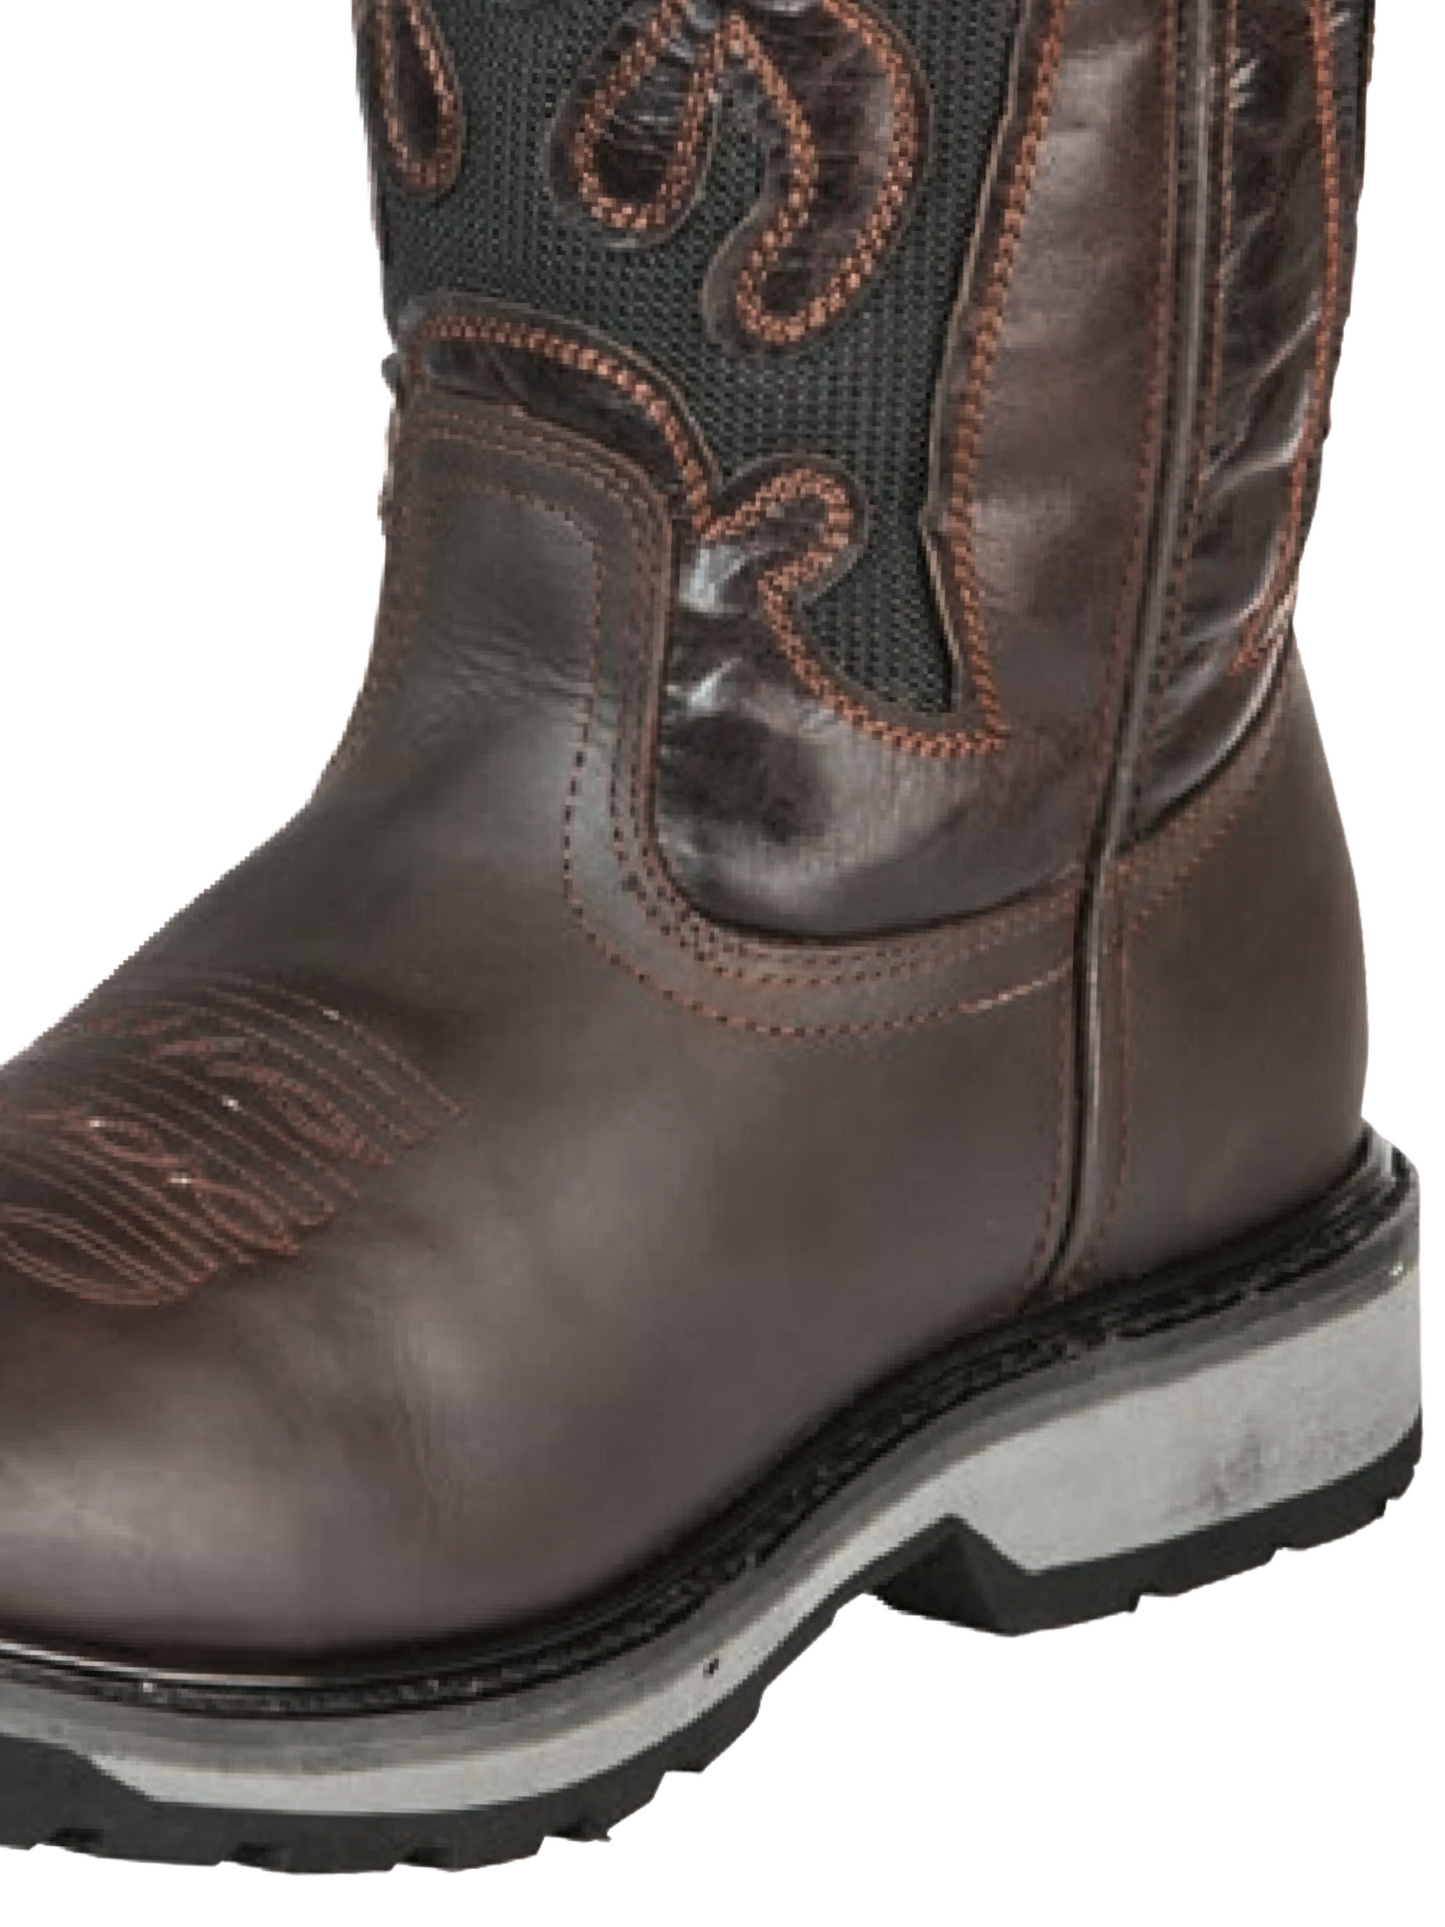 Work Boots Rodeo Pull-On Tube with Genuine Leather Soft Tip for Men 'El General' - ID: 51275